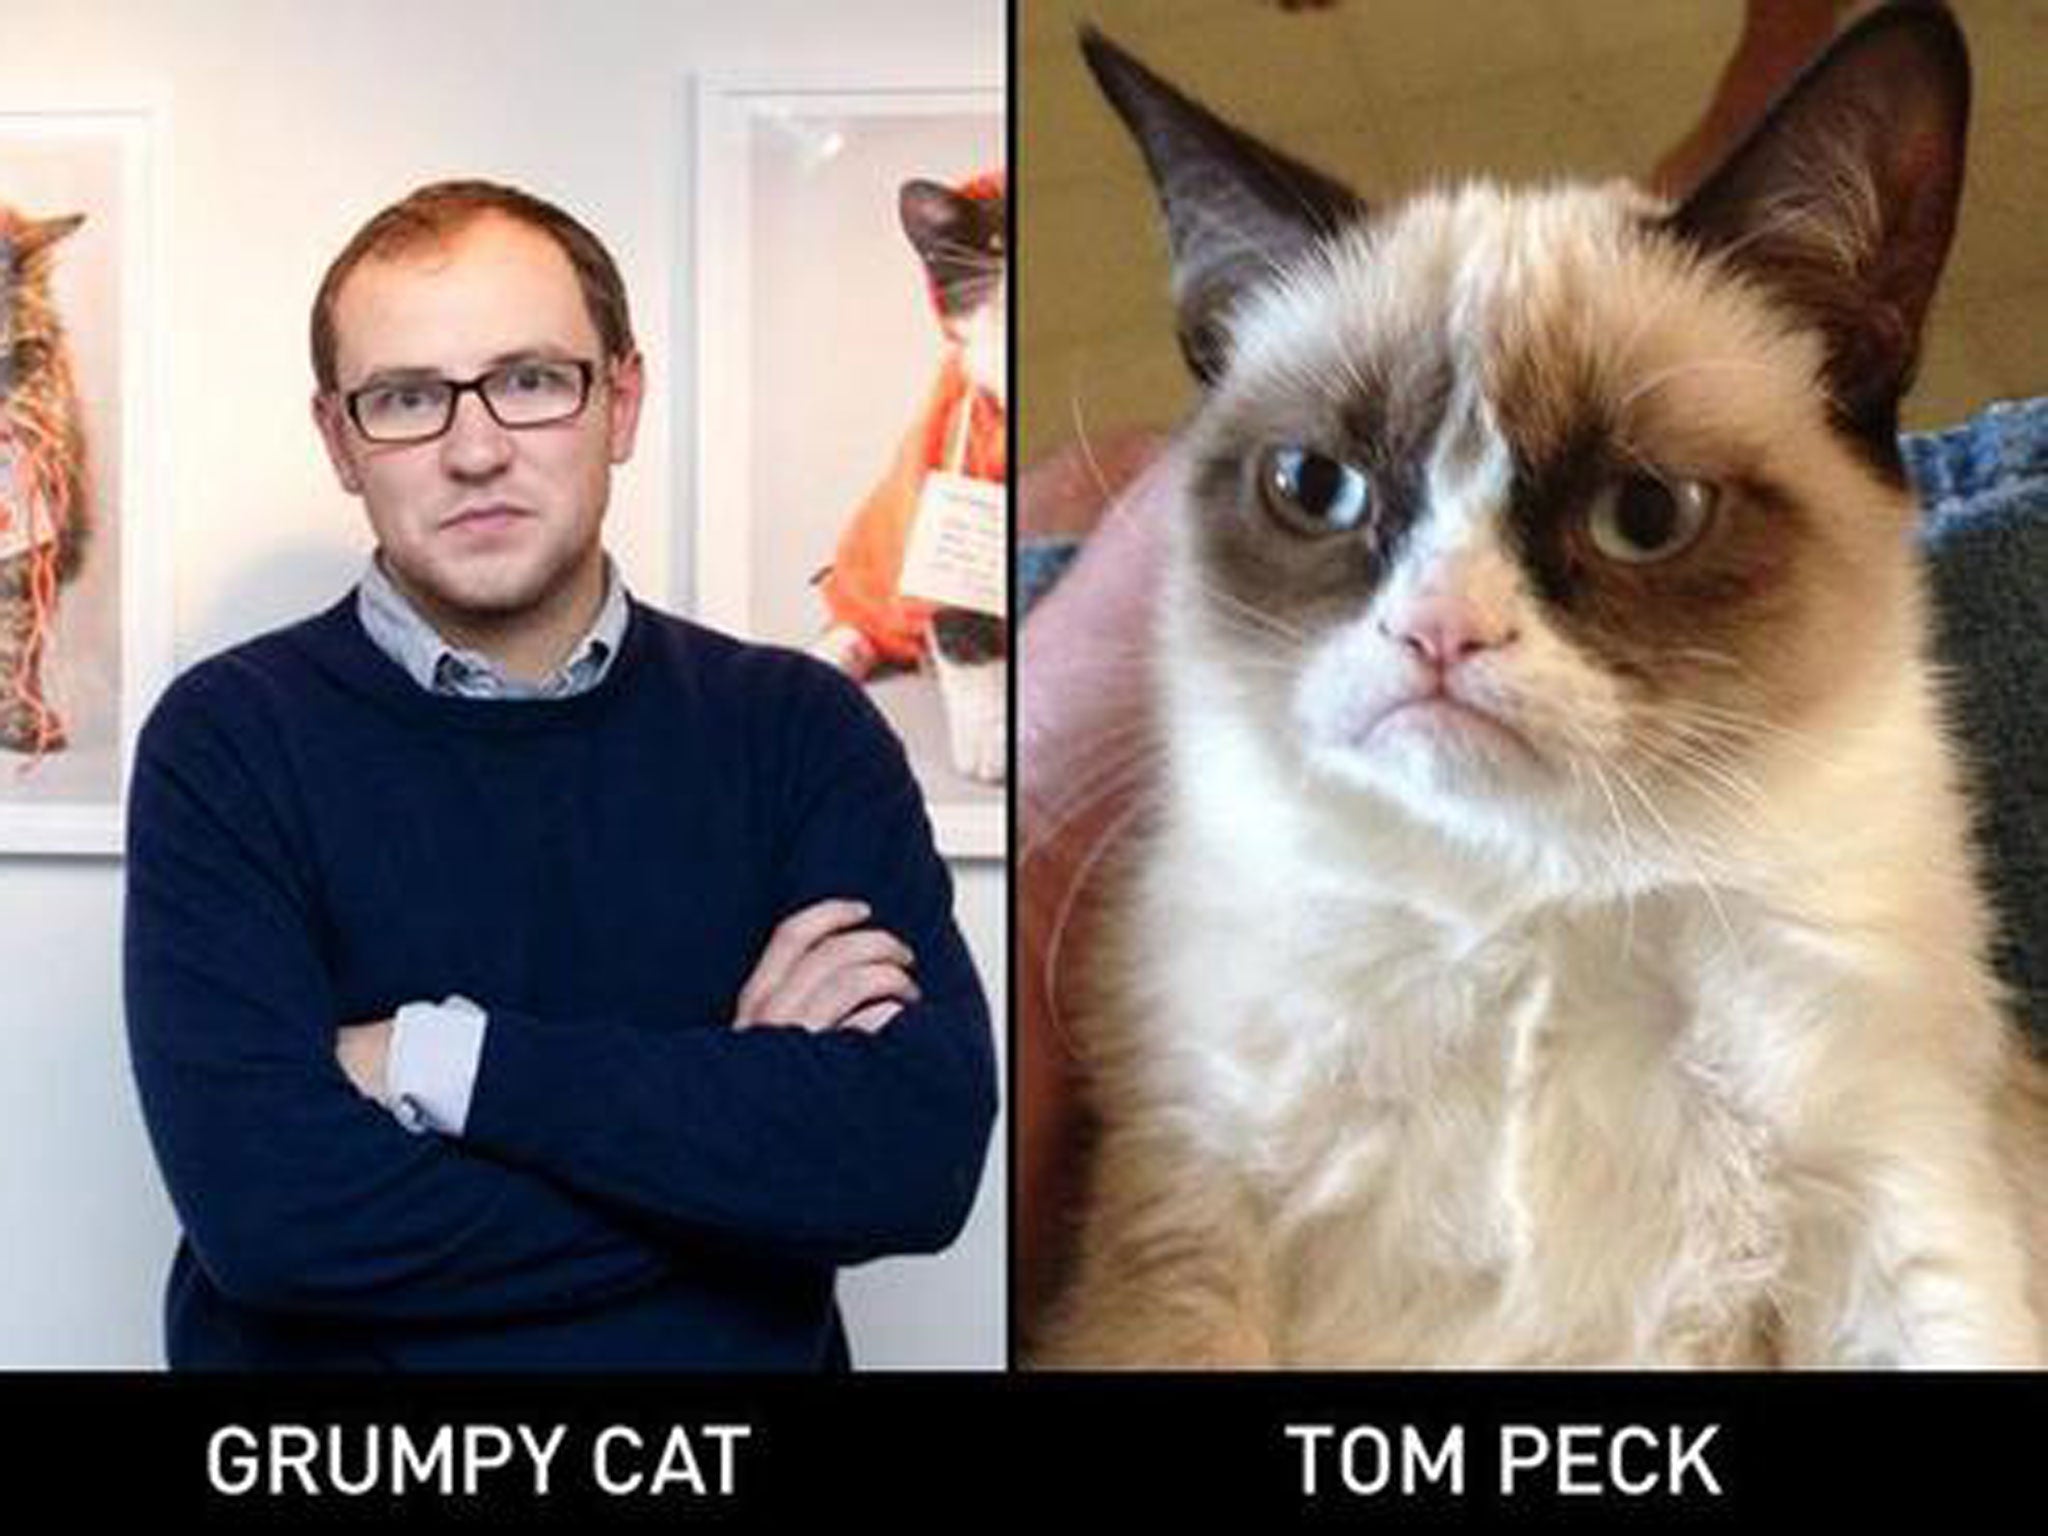 Independent reporter Tom Peck and a Grumpy Cat. But which is which?